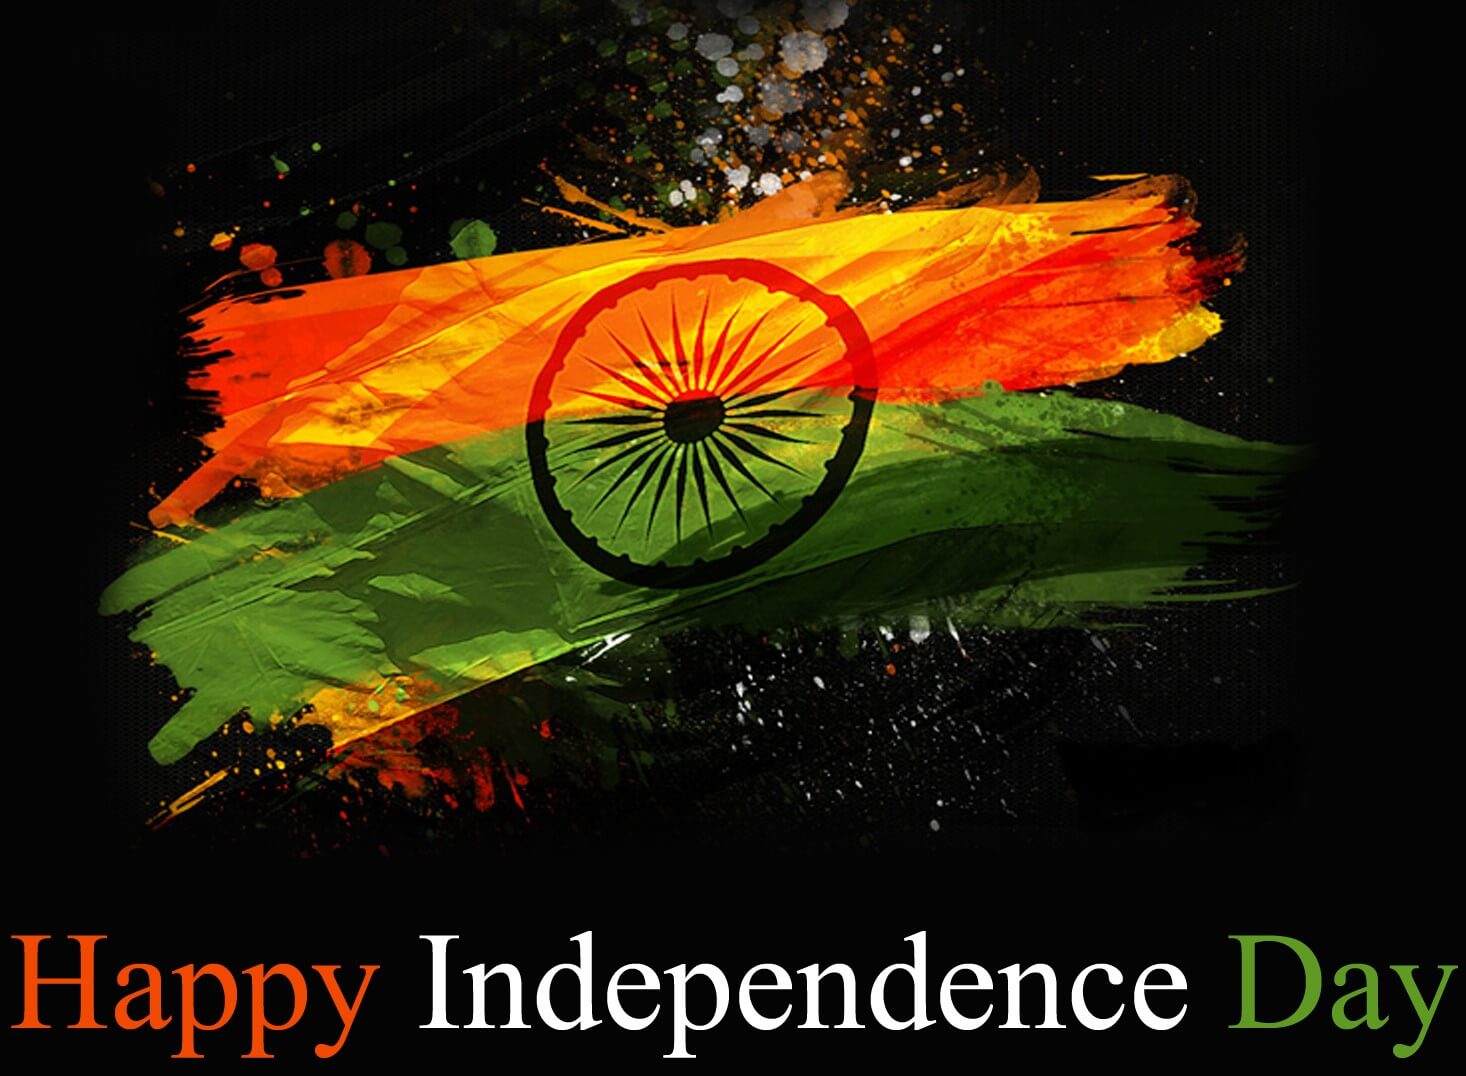 Essay on indian independence day for kids